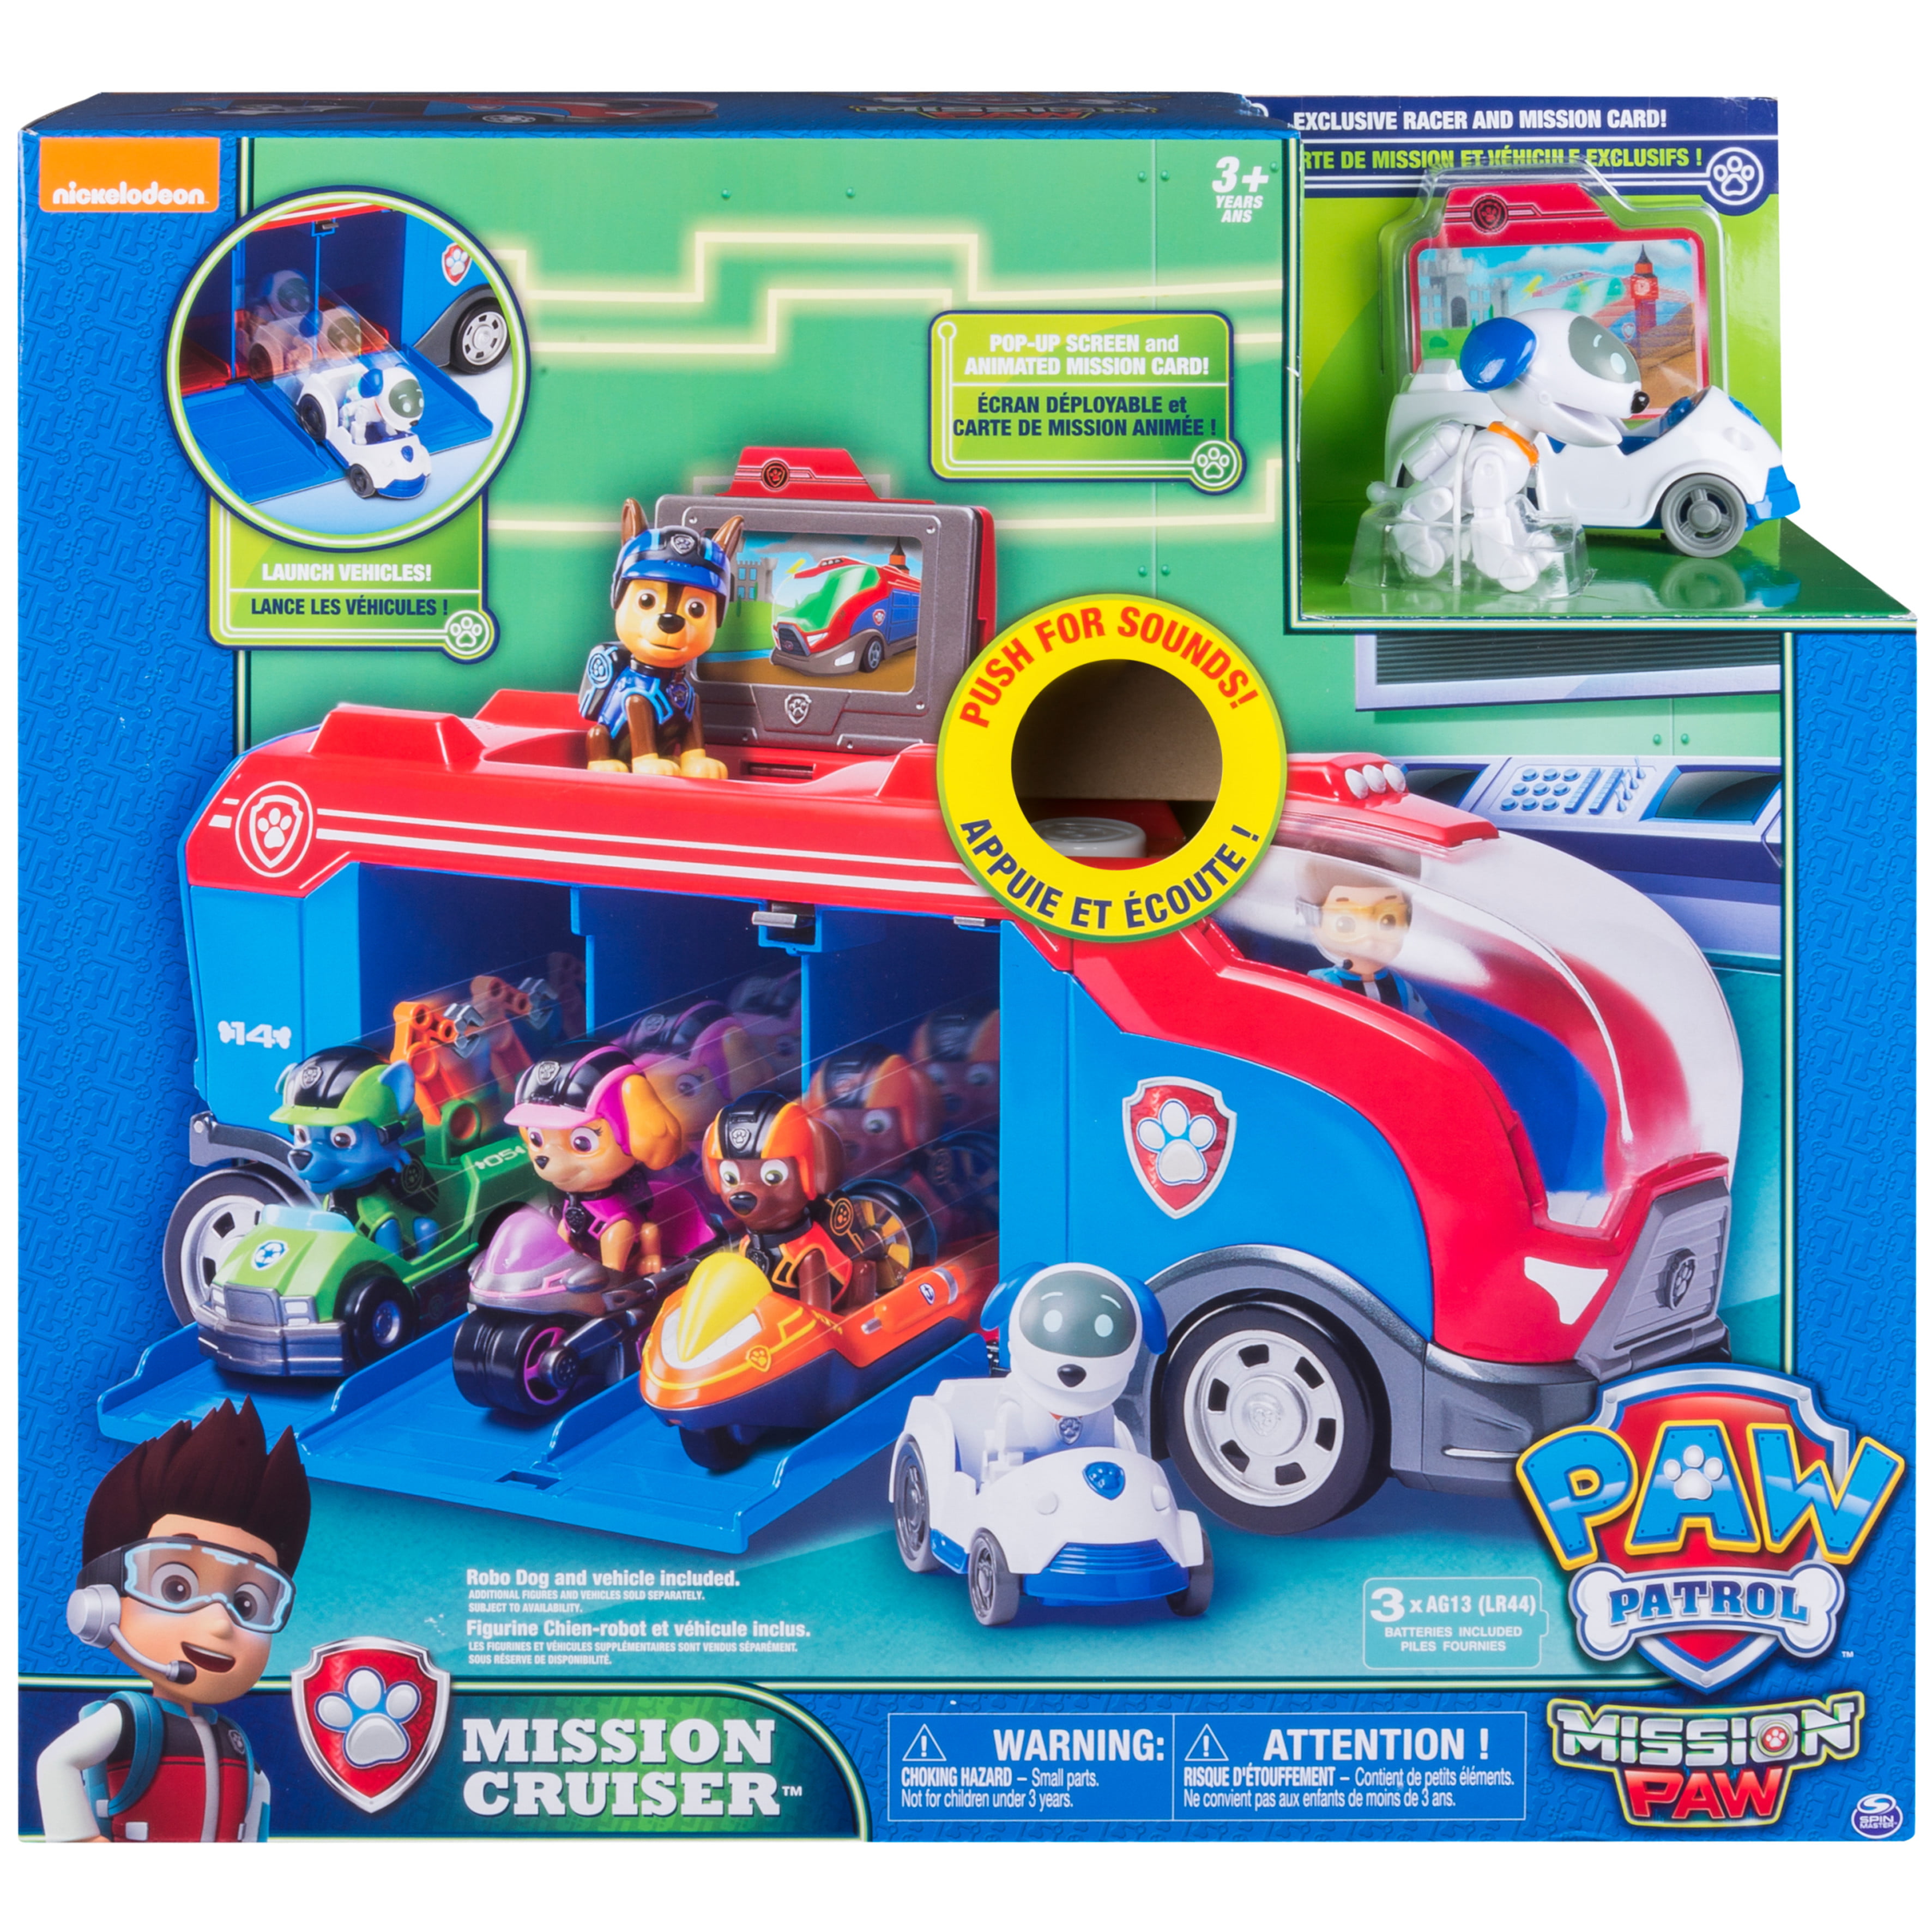 Paw Patrol Mission Paw - Mission Cruiser - Robo Dog and Vehicle - image 5 of 8